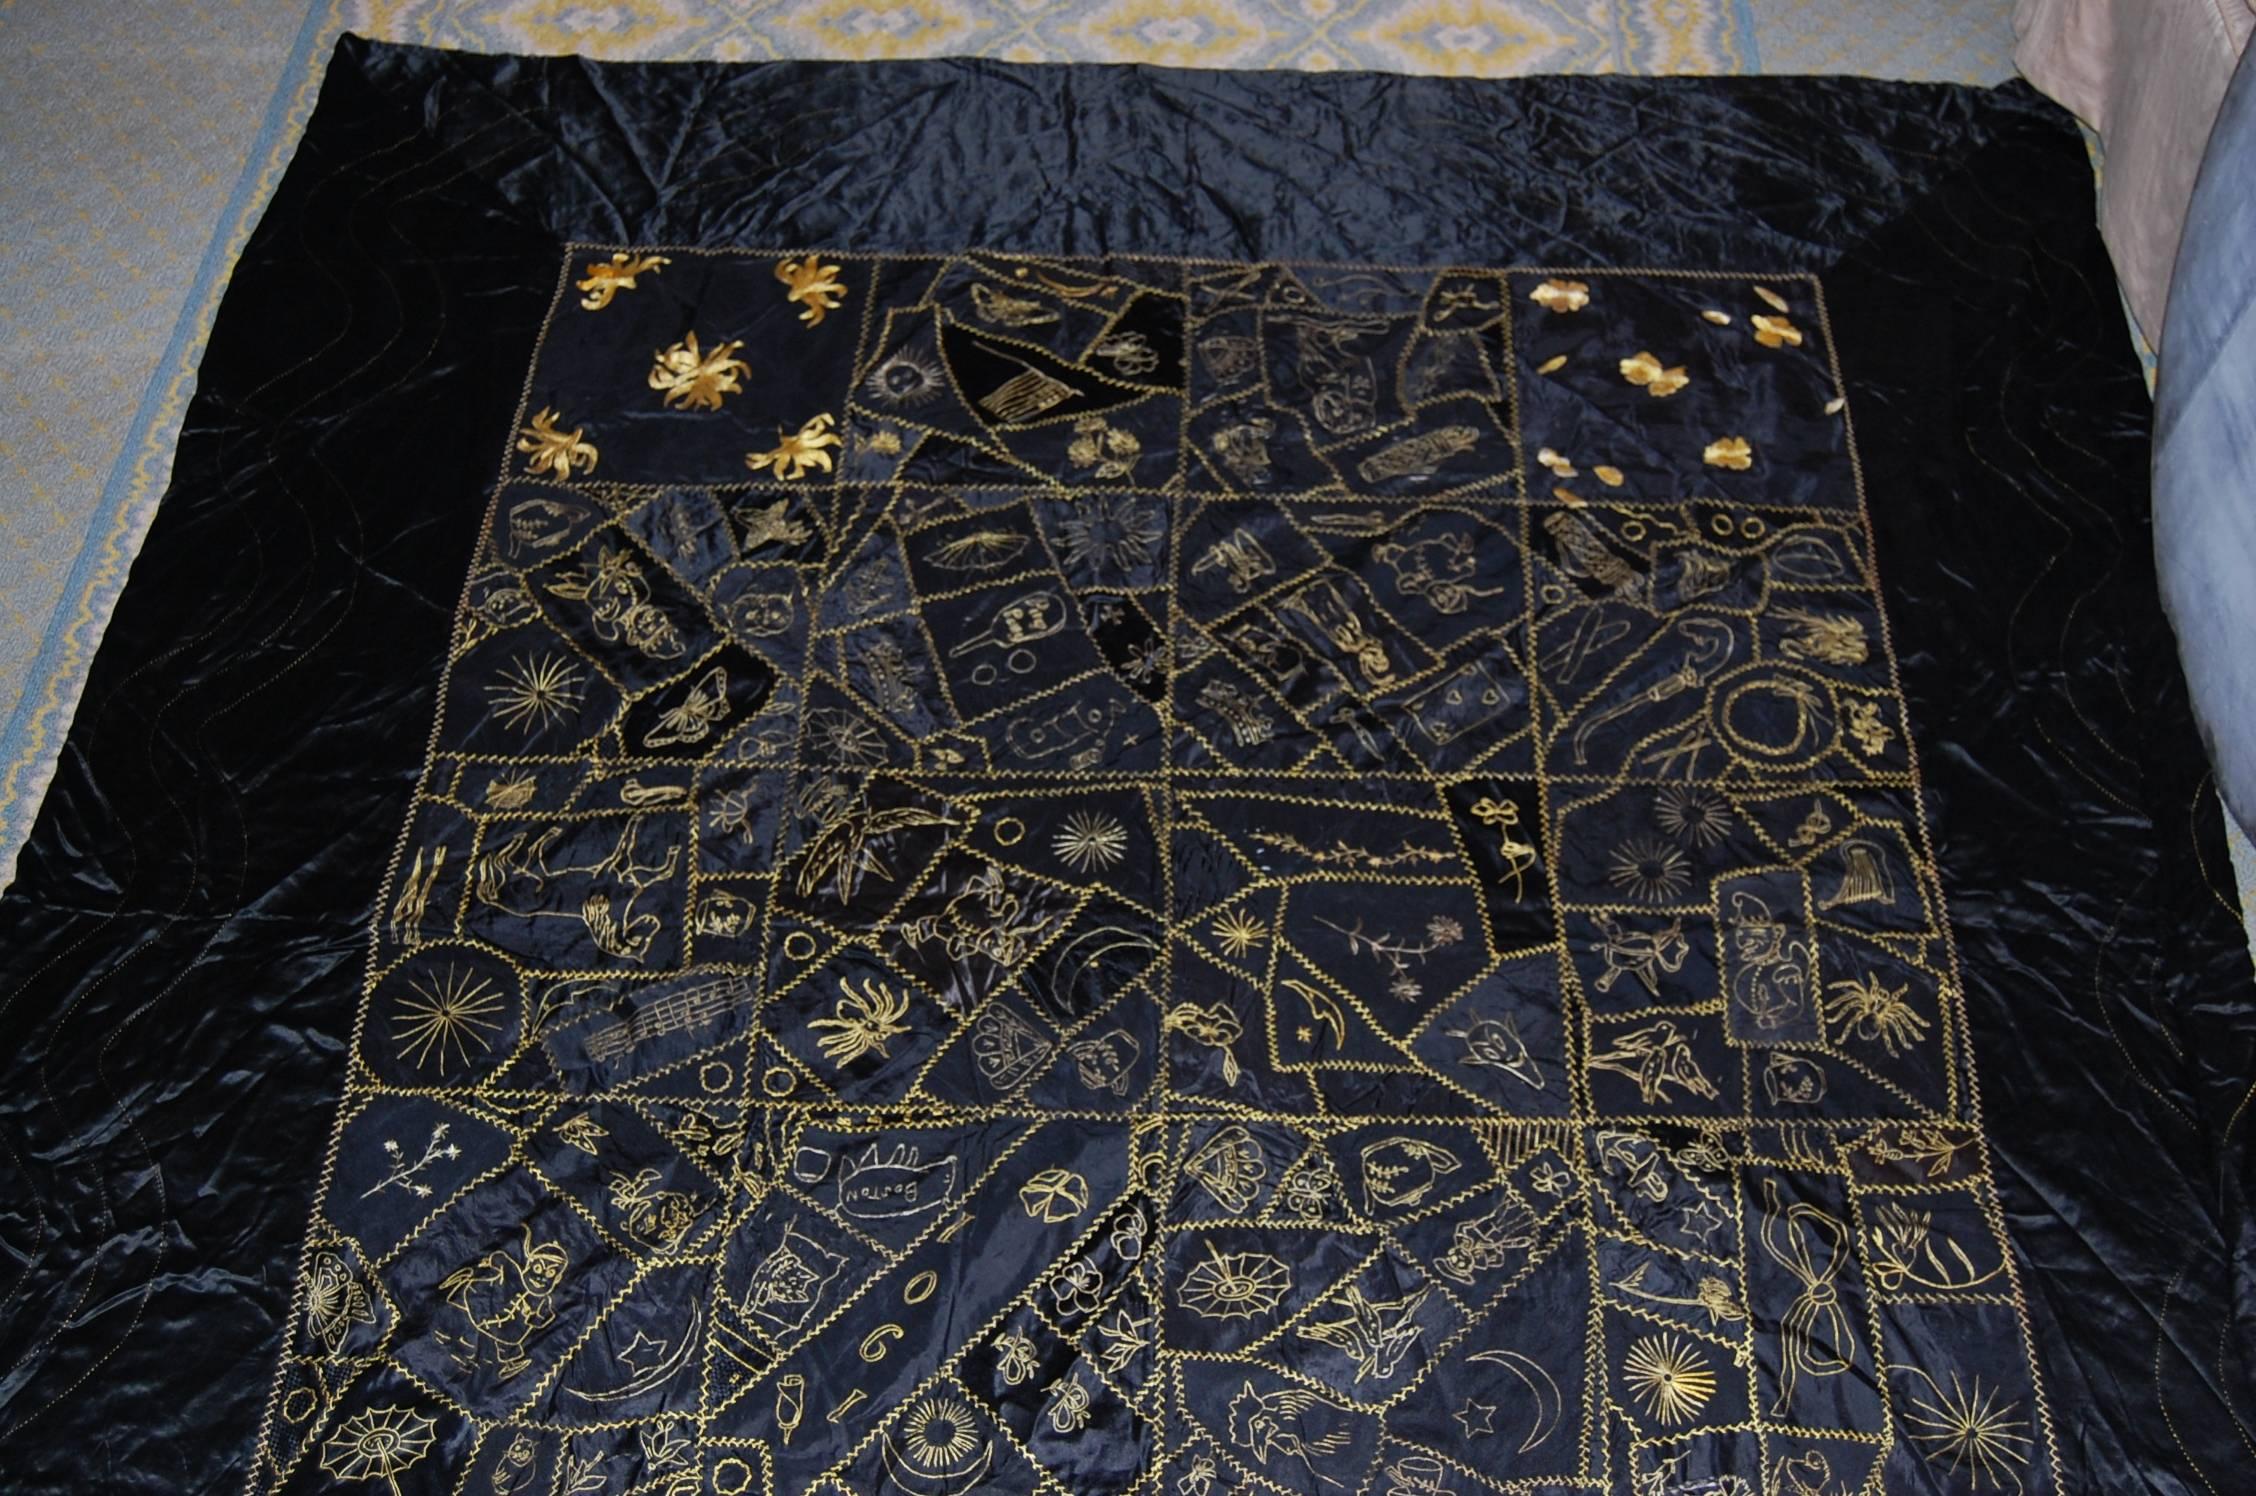 Fantastic quilt all done in gold threads on black silk, dated 1901, Boston. There are many different depictions of children, animals, etc., measures: 80" x 93".